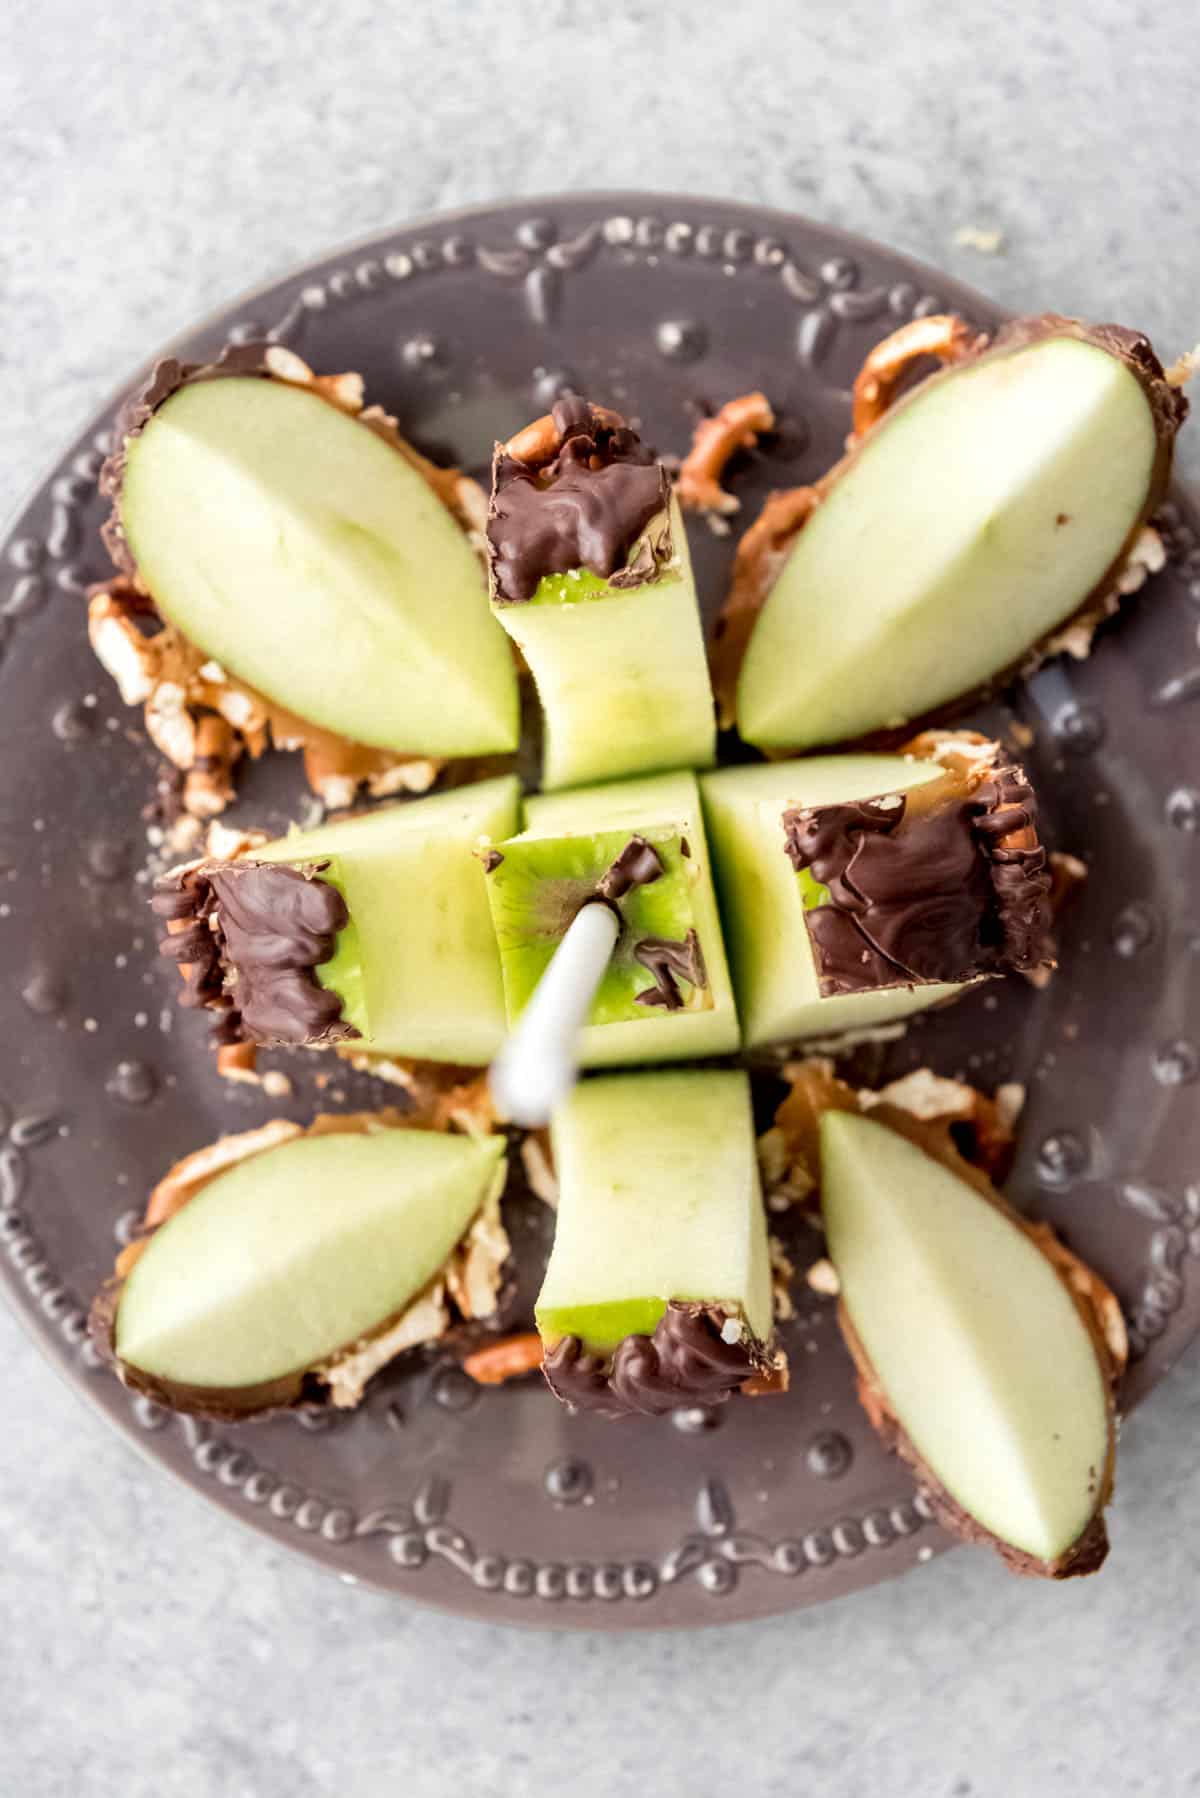 An image of a caramel apple that has been cut into segments for easier eating.